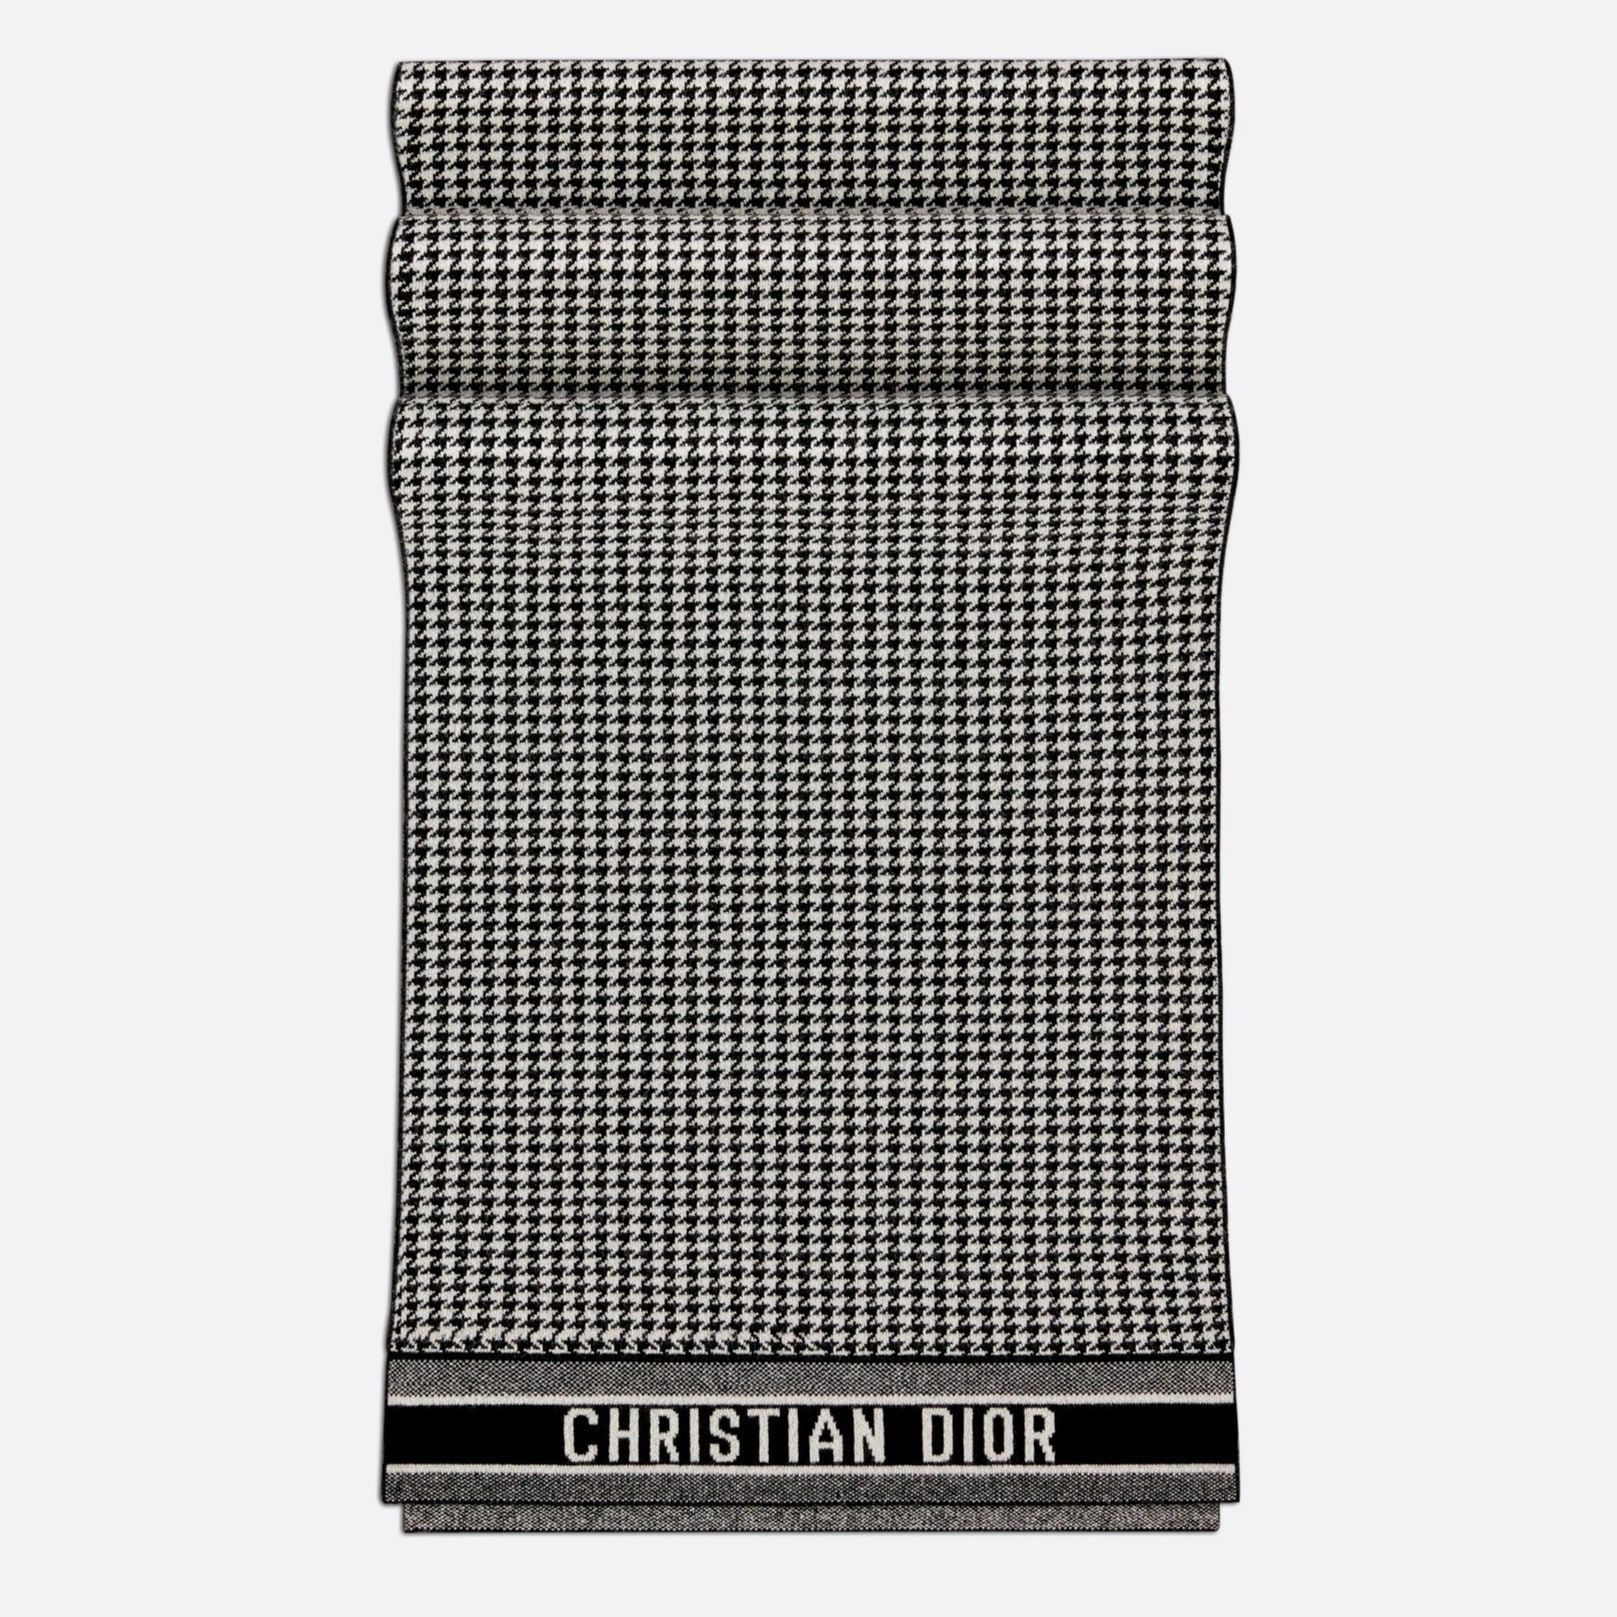 KHĂN CHOÀNG CỖ DIOR 30 MONTAIGNE SCARF BLACK AND WHITE BLENDED CASHMERE KNIT 3